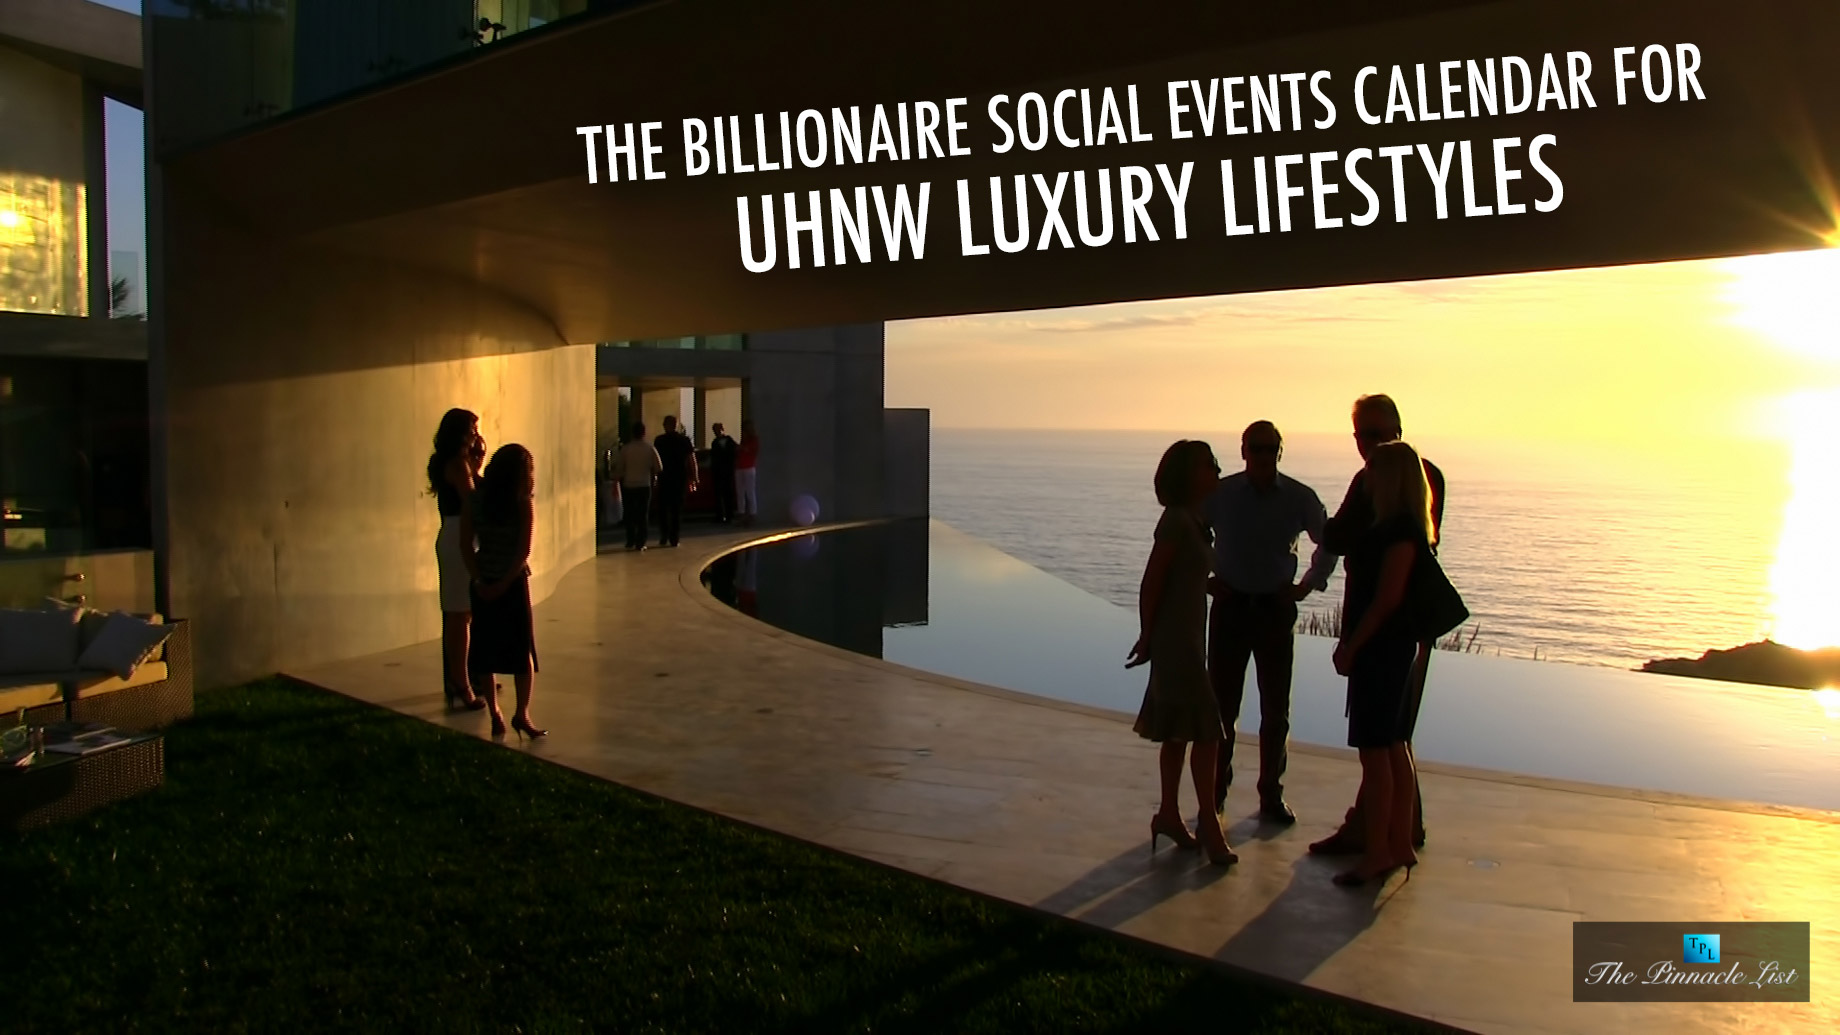 The Billionaire Social Events Calendar for UHNW Luxury Lifestyles